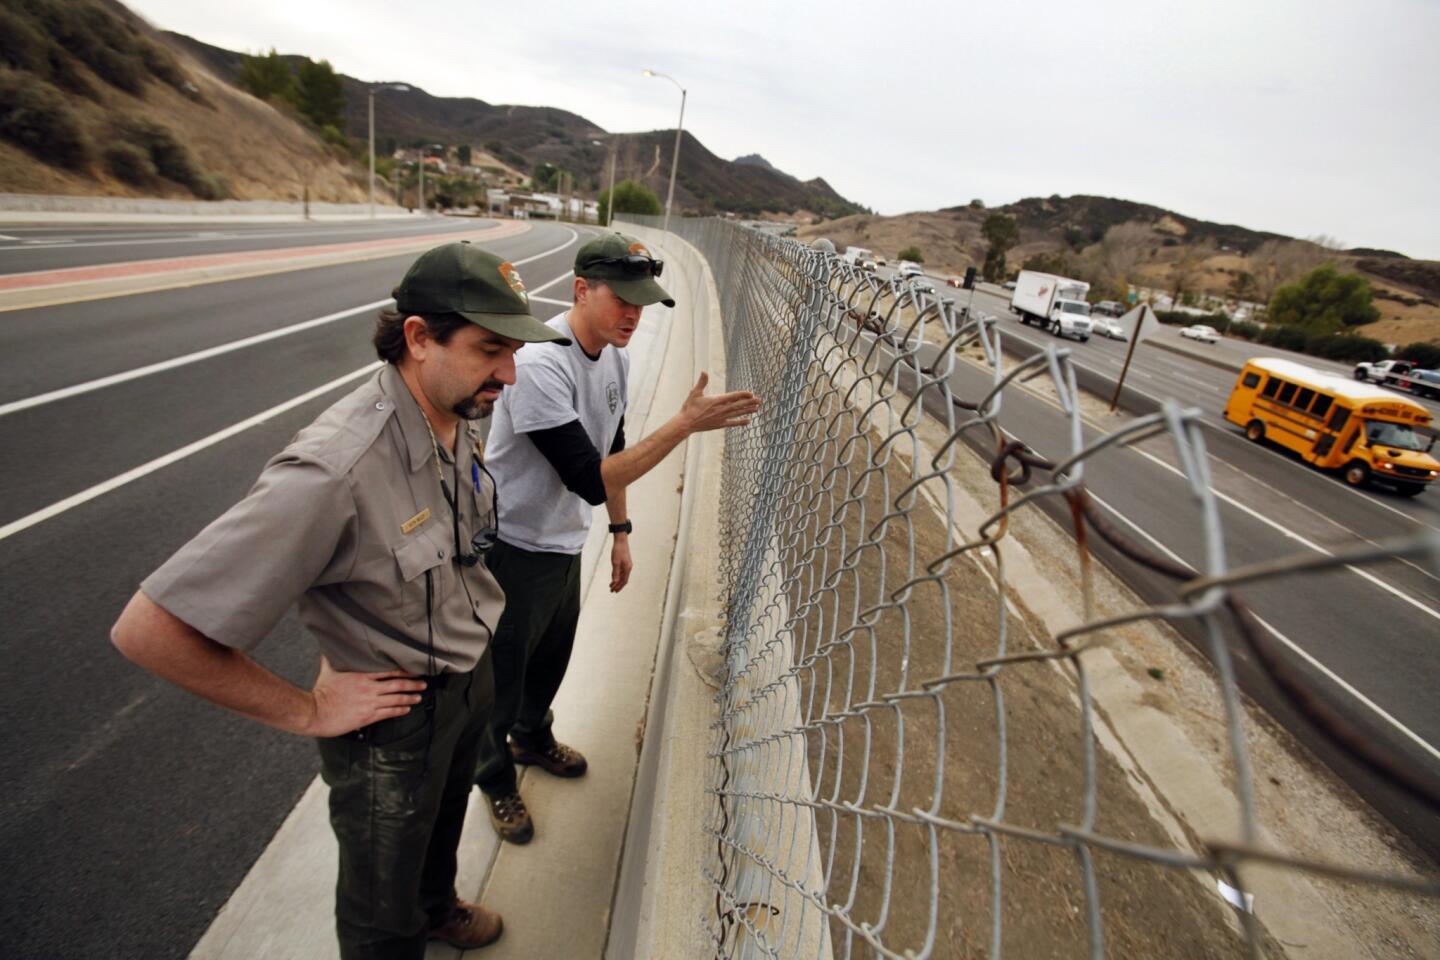 The National Park Service's Seth Riley, left, and Jeff Sikich stand at a wall overlooking the 101 Freeway at Liberty Canyon Road in Agoura Hills, where a mountain lion was fatally struck by a car in October 2013 while attempting to cross. The area is part of a critical wildlife corridor.